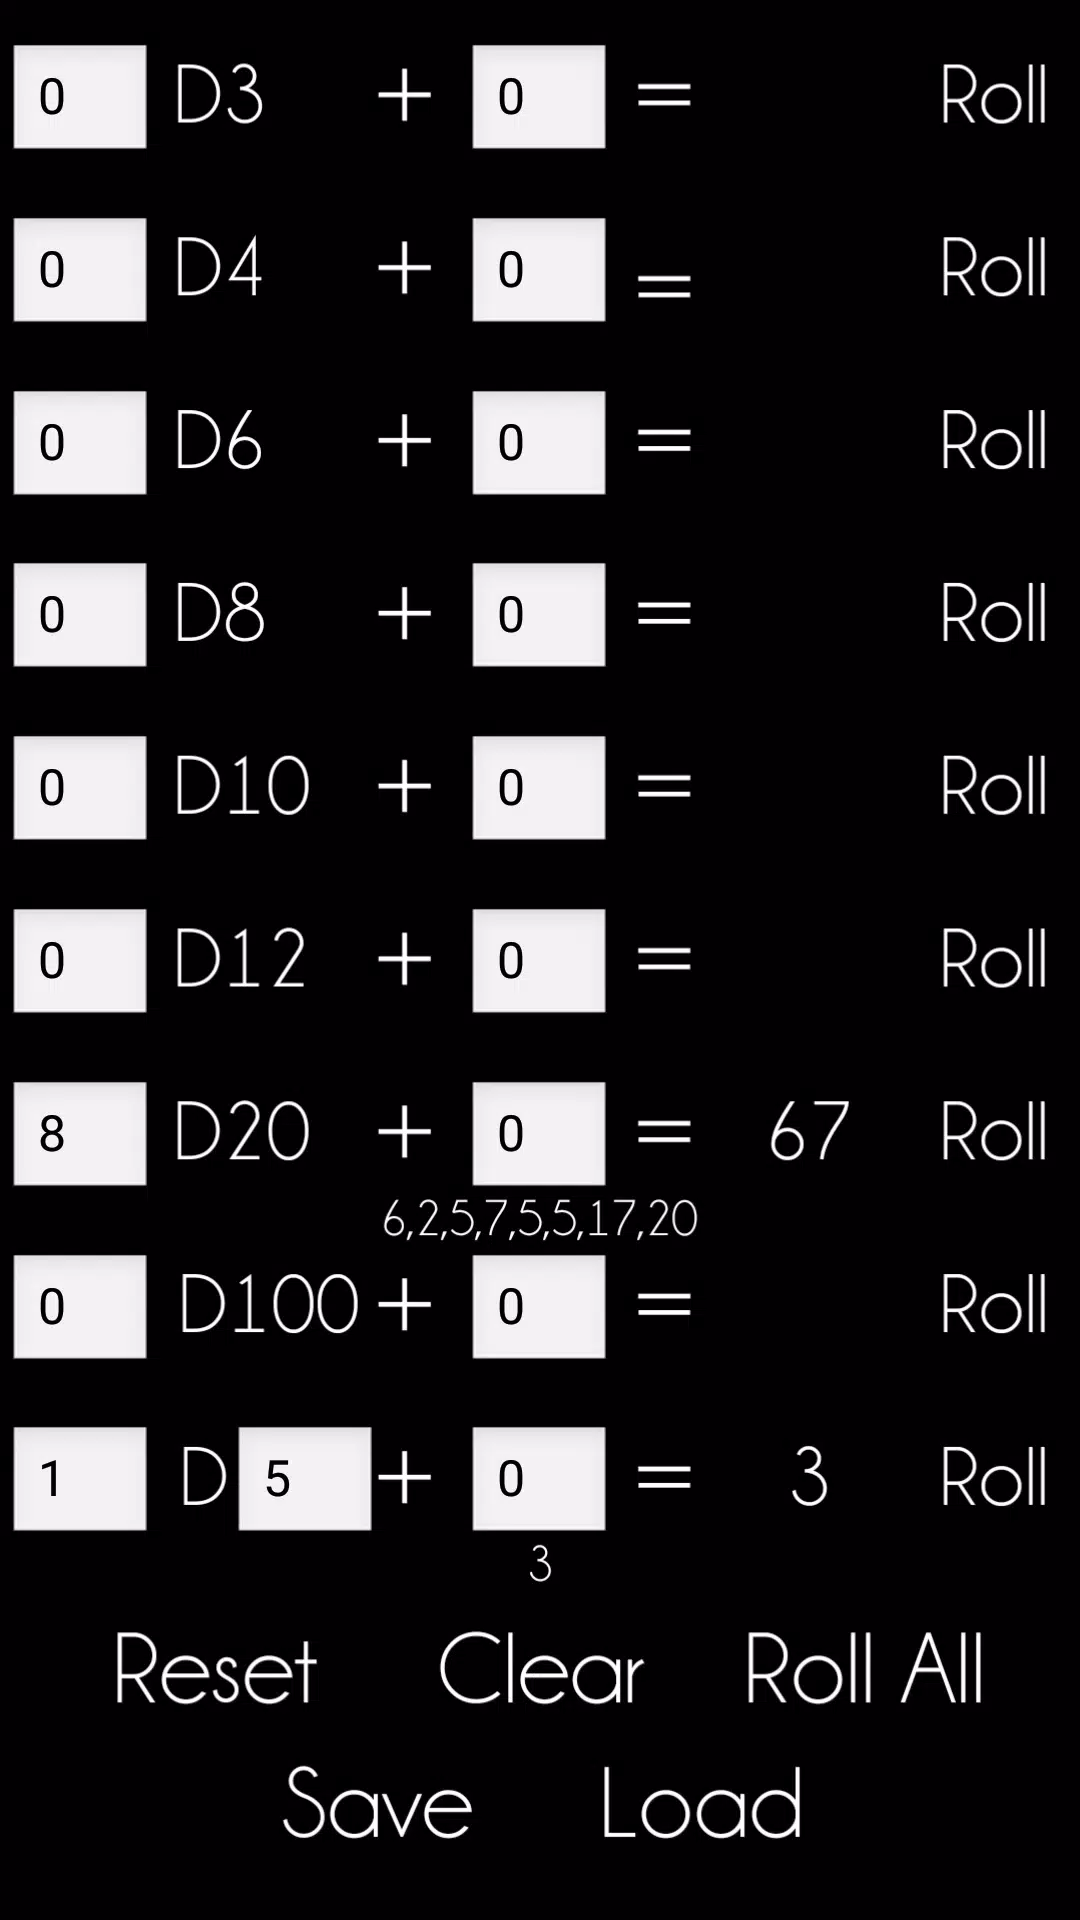 DnD Dice Roller for Android - APK Download